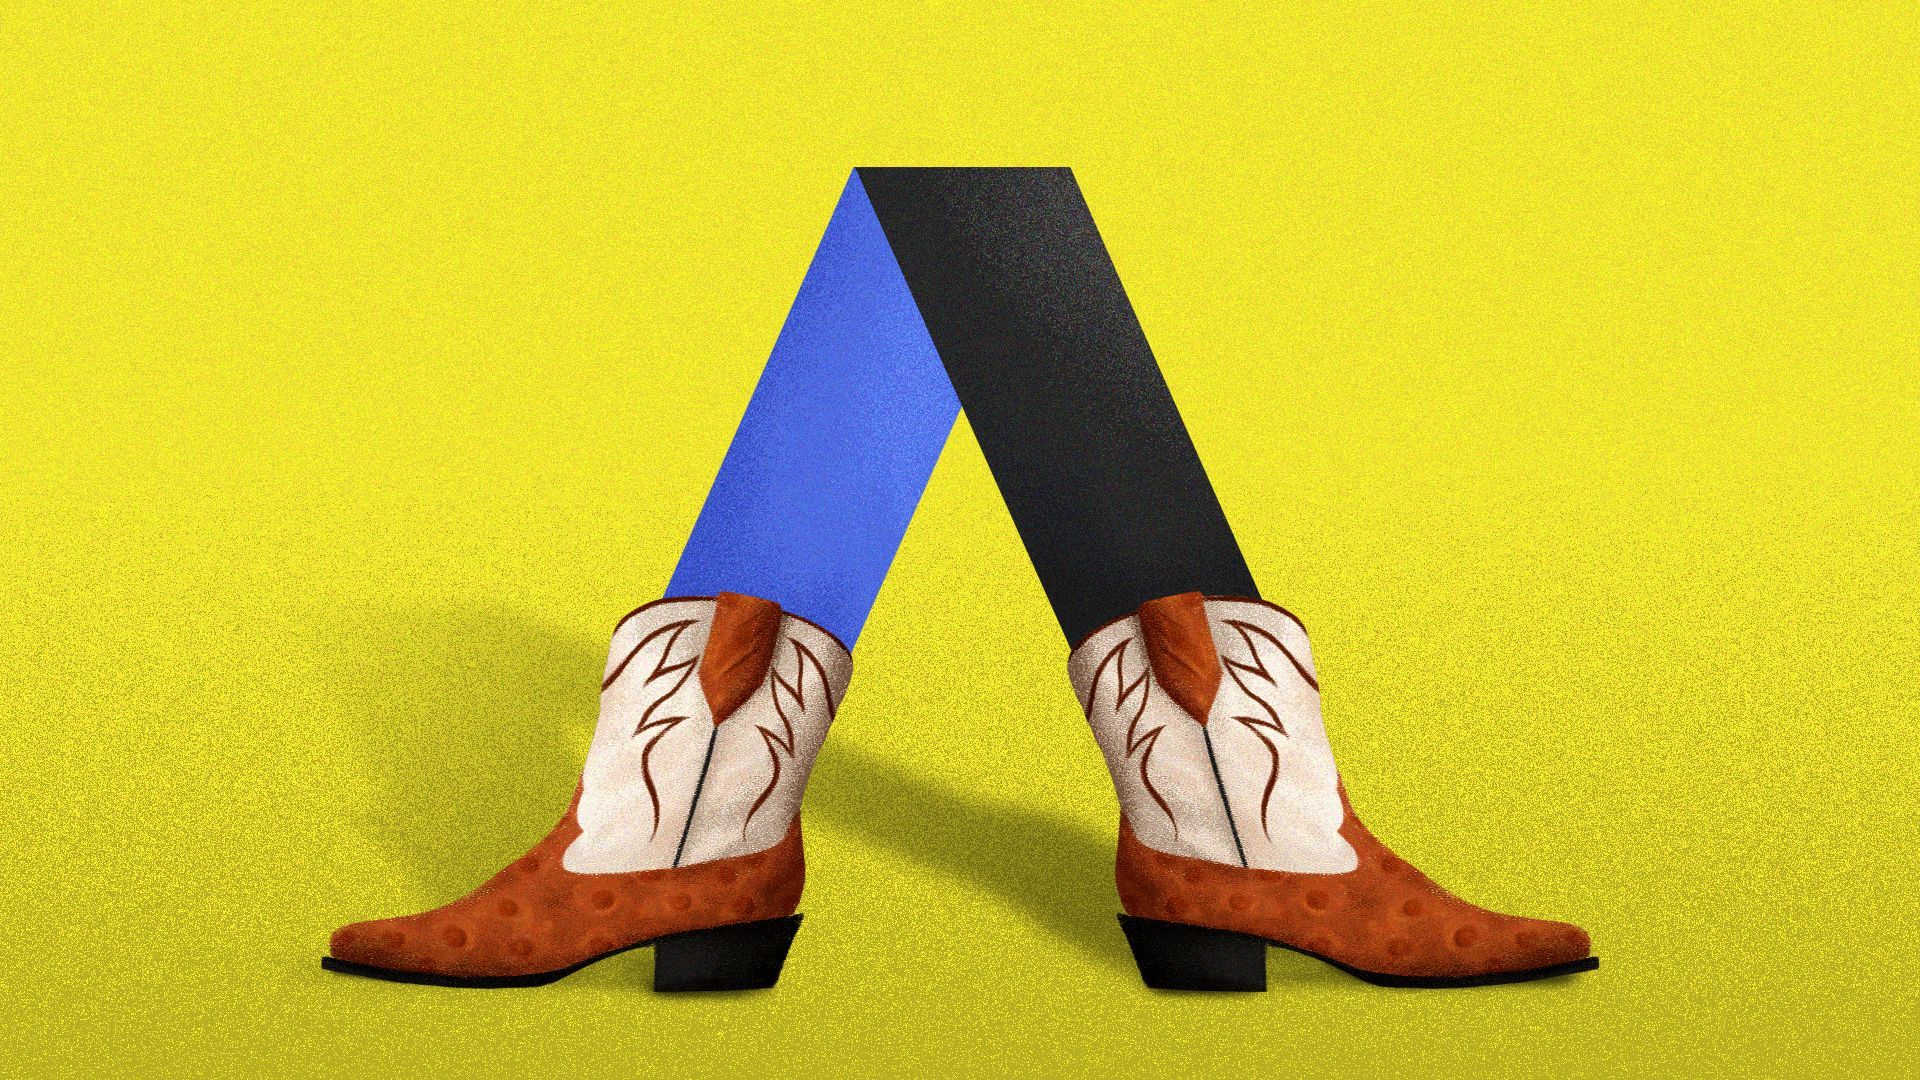 Illustration of the Axios logo wearing cowboy boots.